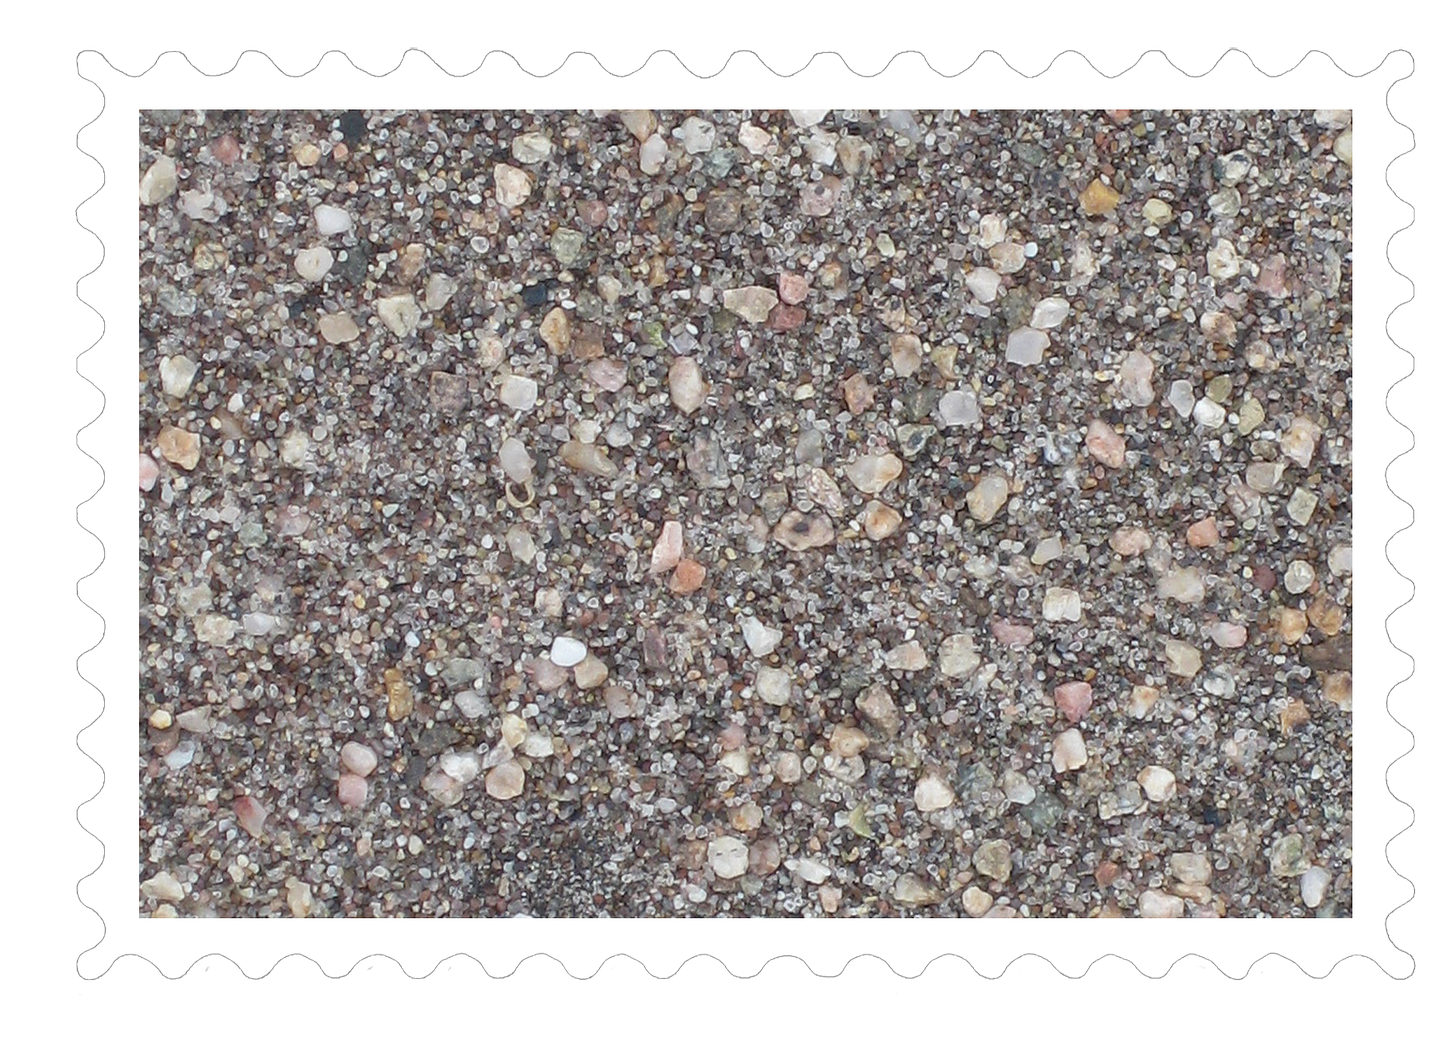 Close-up of sand at Great Sand Dunes National Park.  There are larger grains and smaller grains.  The larger grains are different colors: tan, pink, orange, white.  The smaller grains are mostly clear or black.